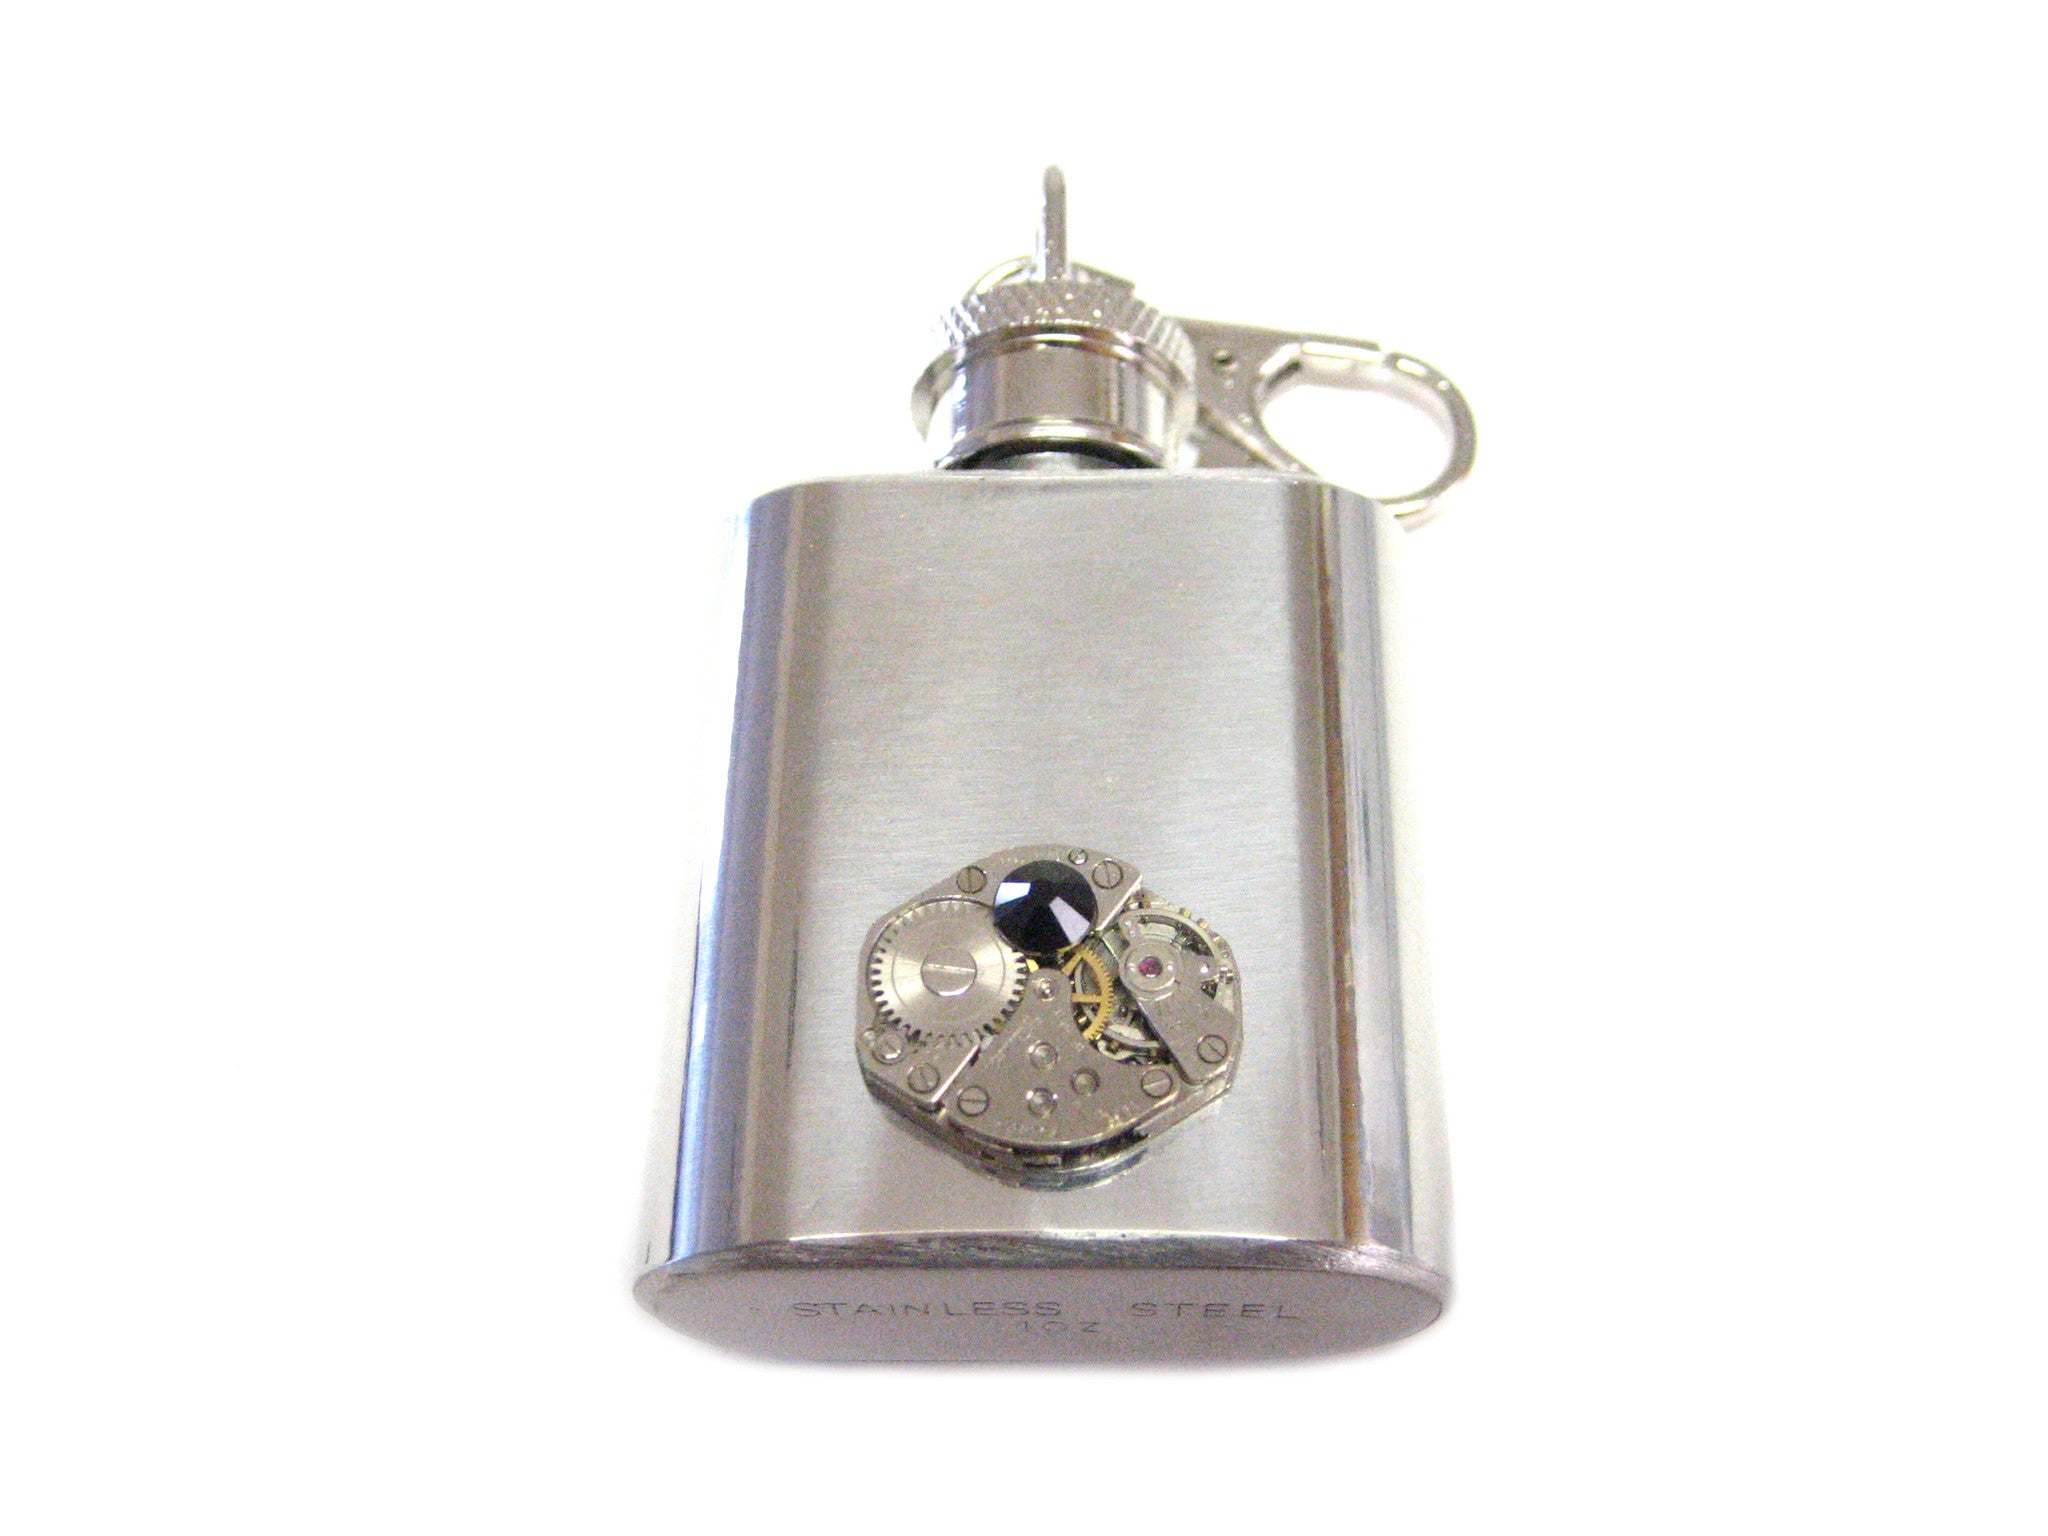 1 Oz. Stainless Steel Key Chain Flask with Steampunk Watch Gear Pendant and B...